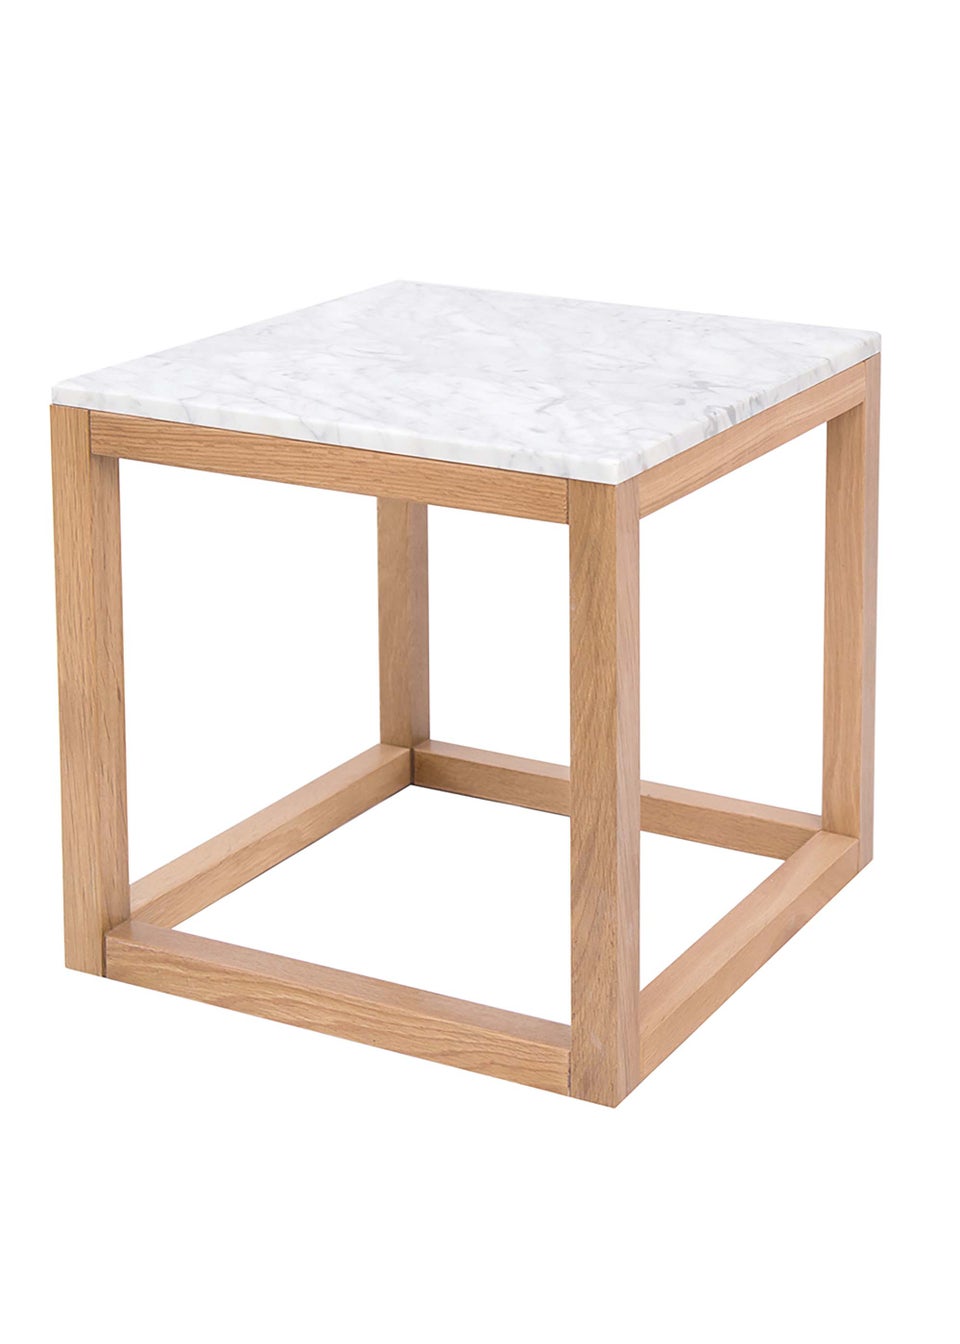 LPD Furniture Harlow End Table Oak-White Marble Top (400x400x400mm)